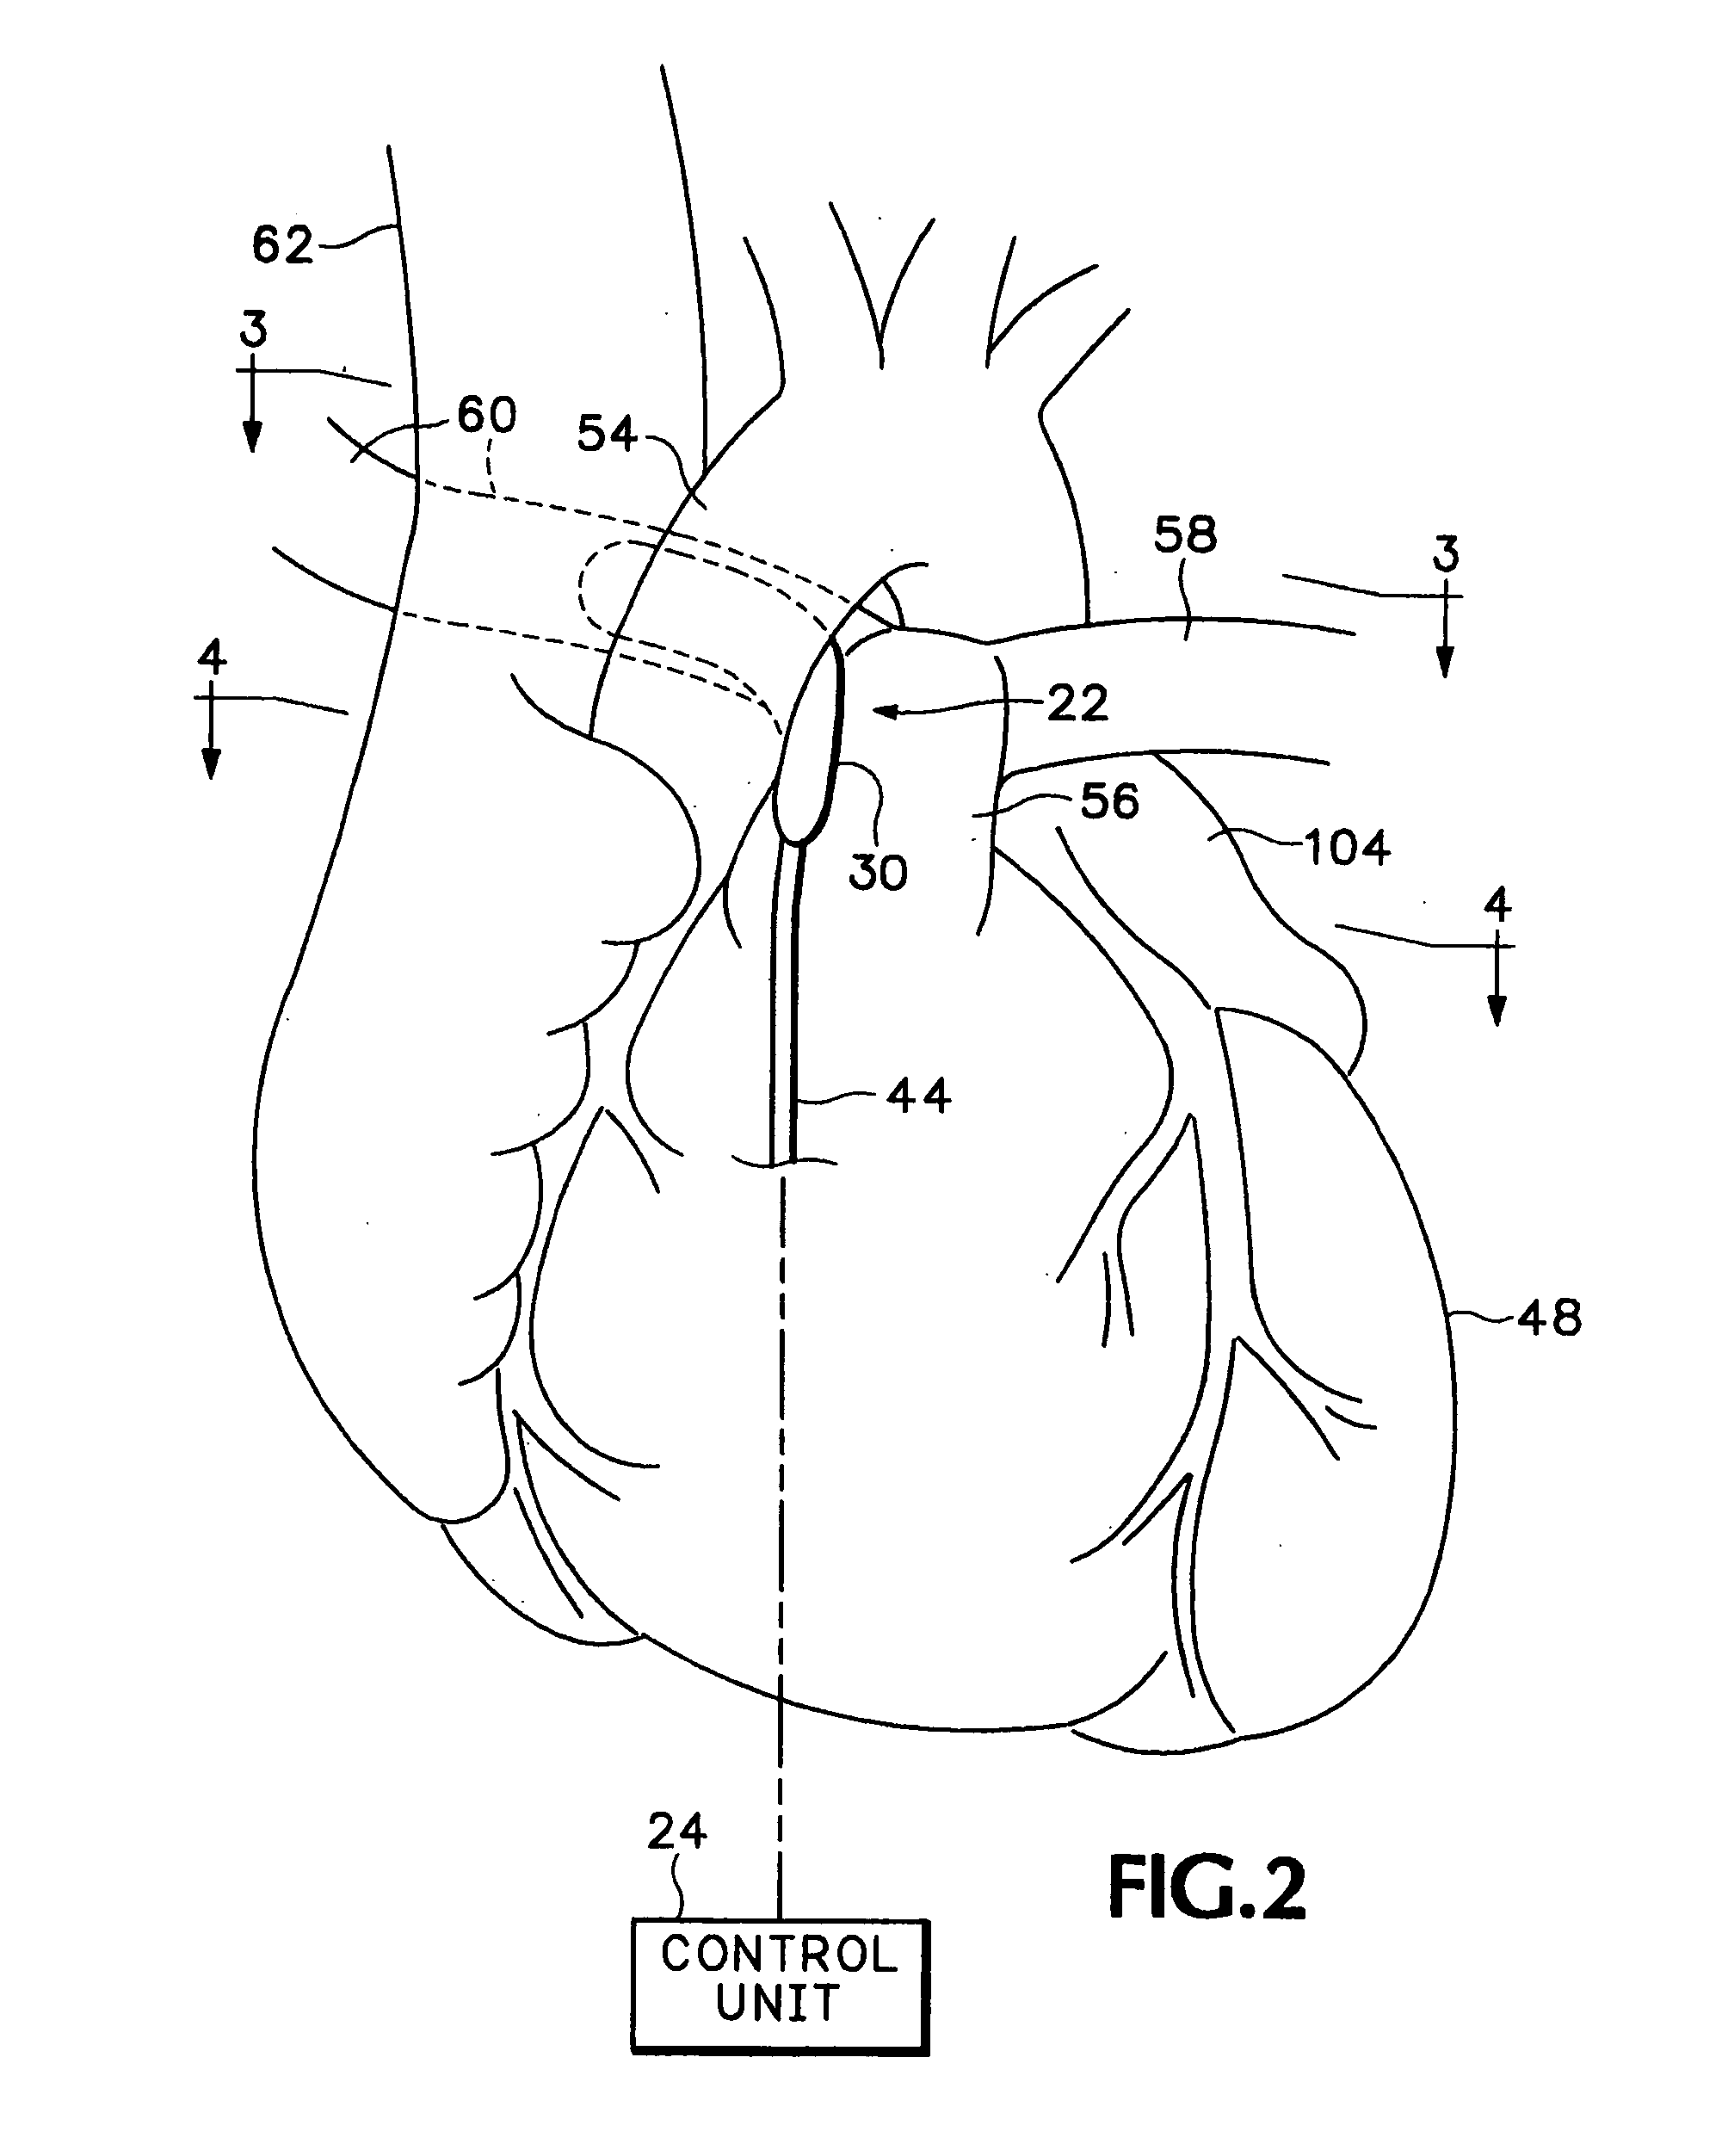 Method and apparatus for monitoring blood condition and cardiopulmonary function